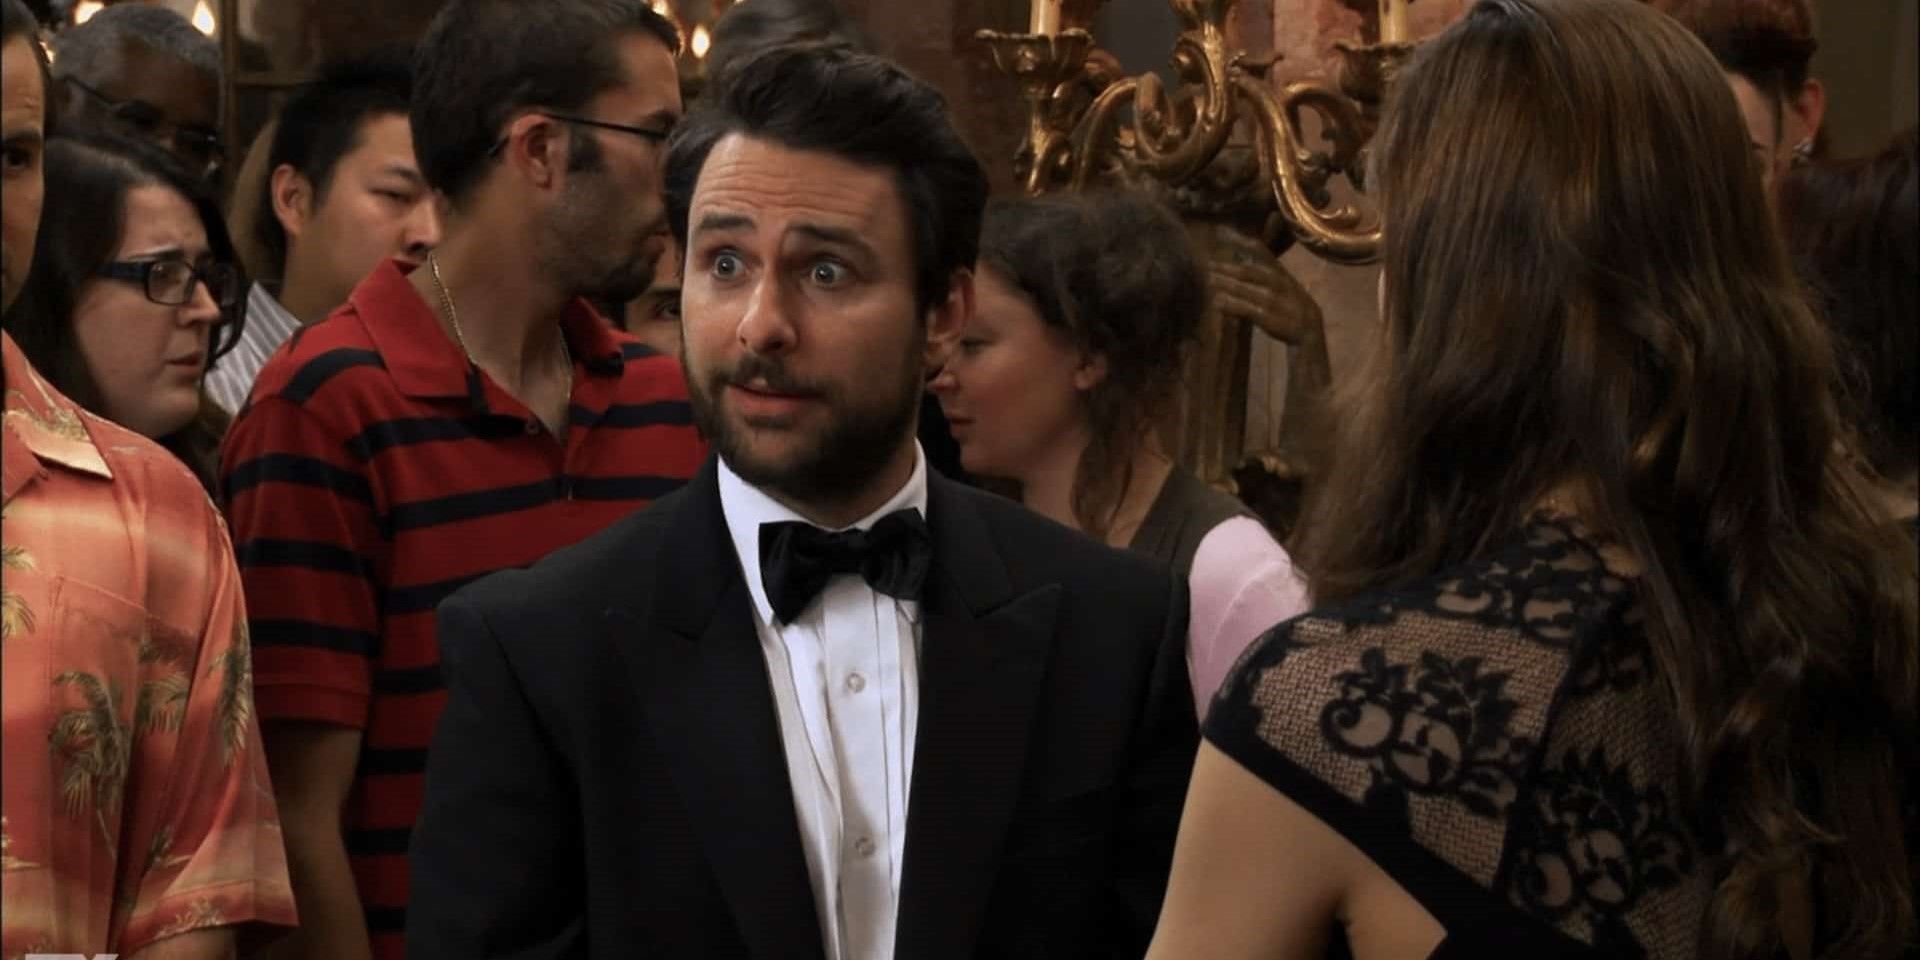 Still from 'It's Always Sunny in Philadelphia': In a room of people, Charlie wears a suit and looks bewildered.